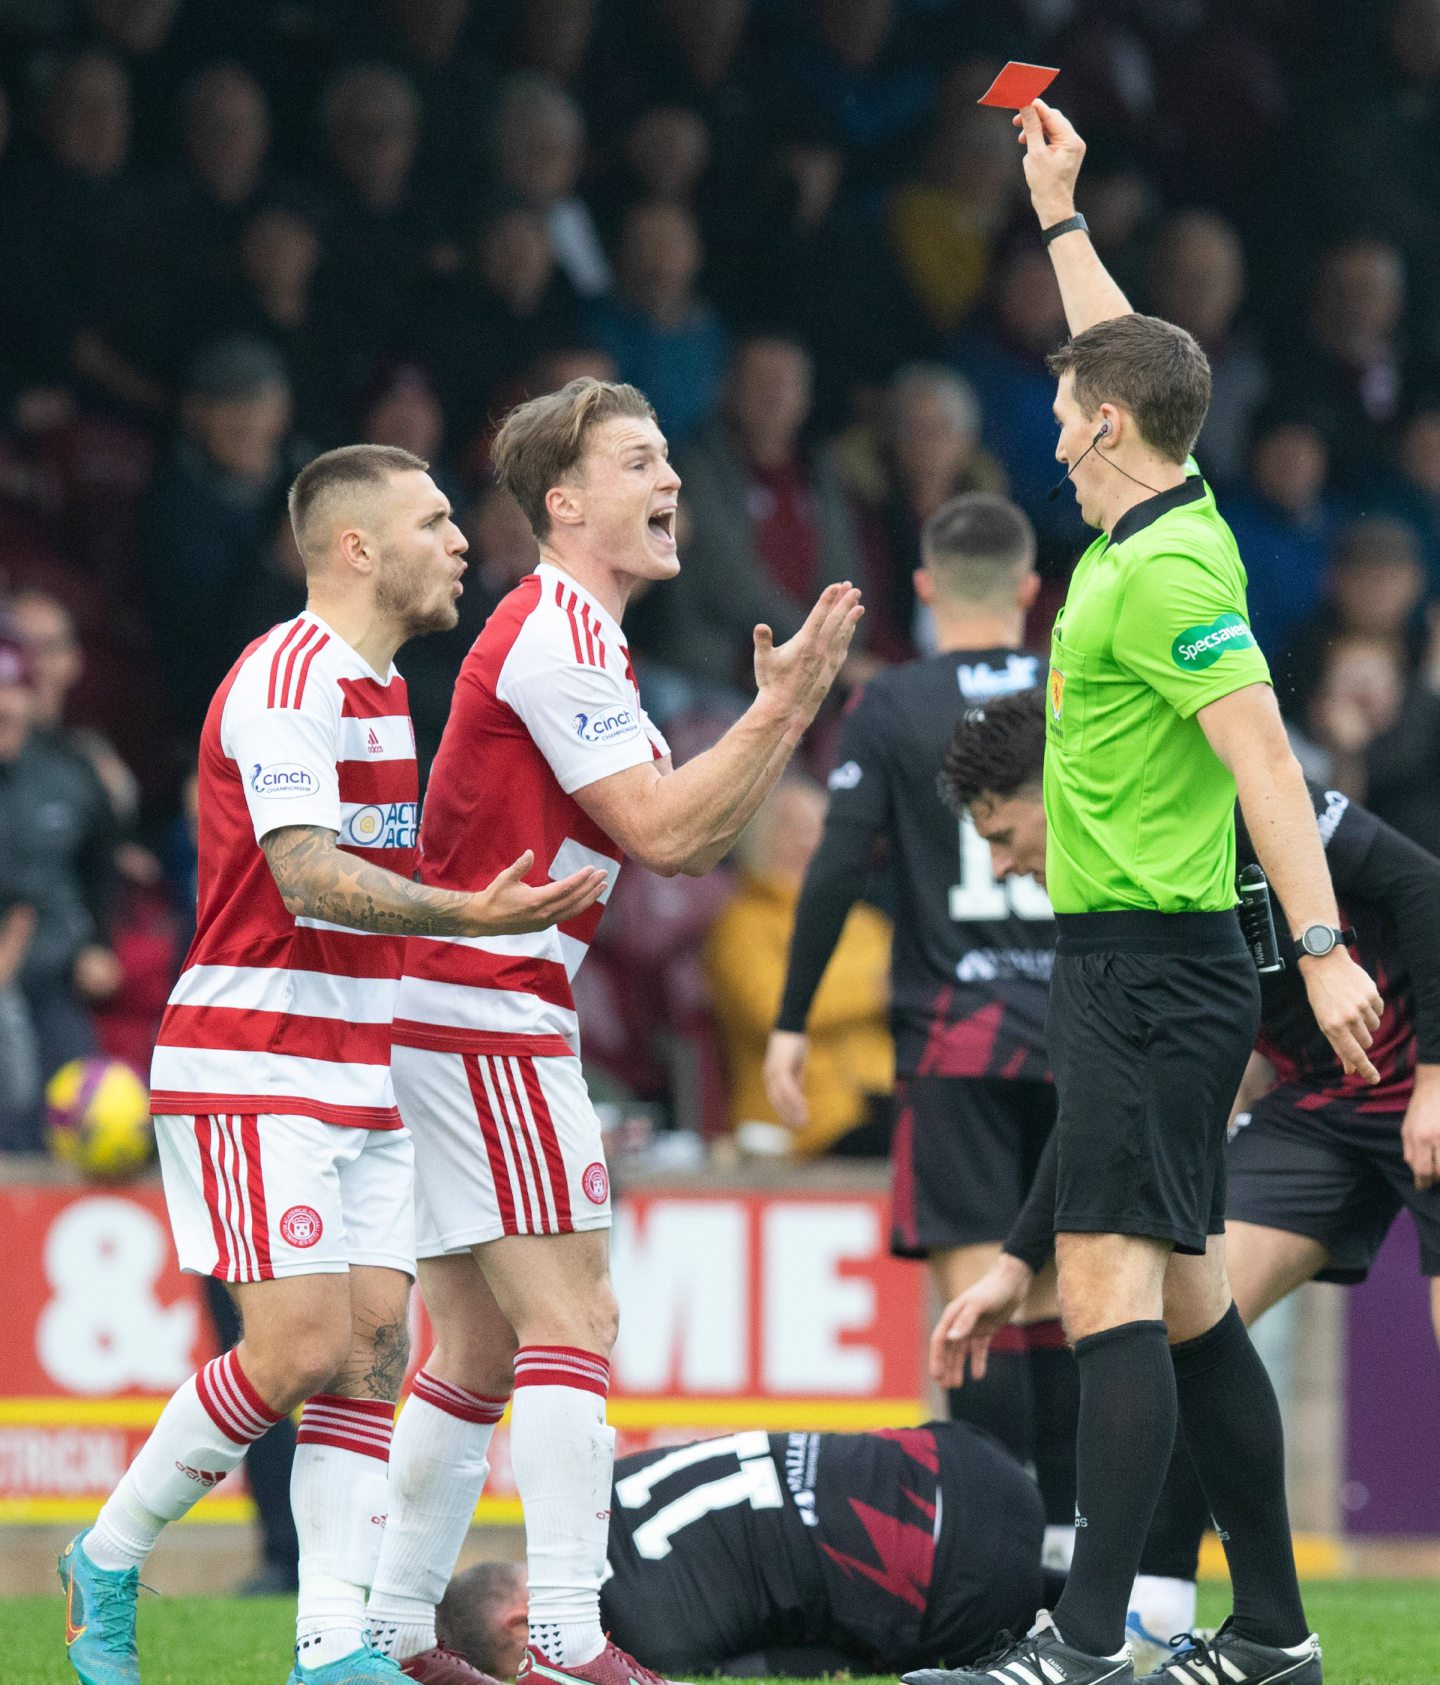 Peter Stuart shows Dan O'Reilly a straight red card. Image: SNS